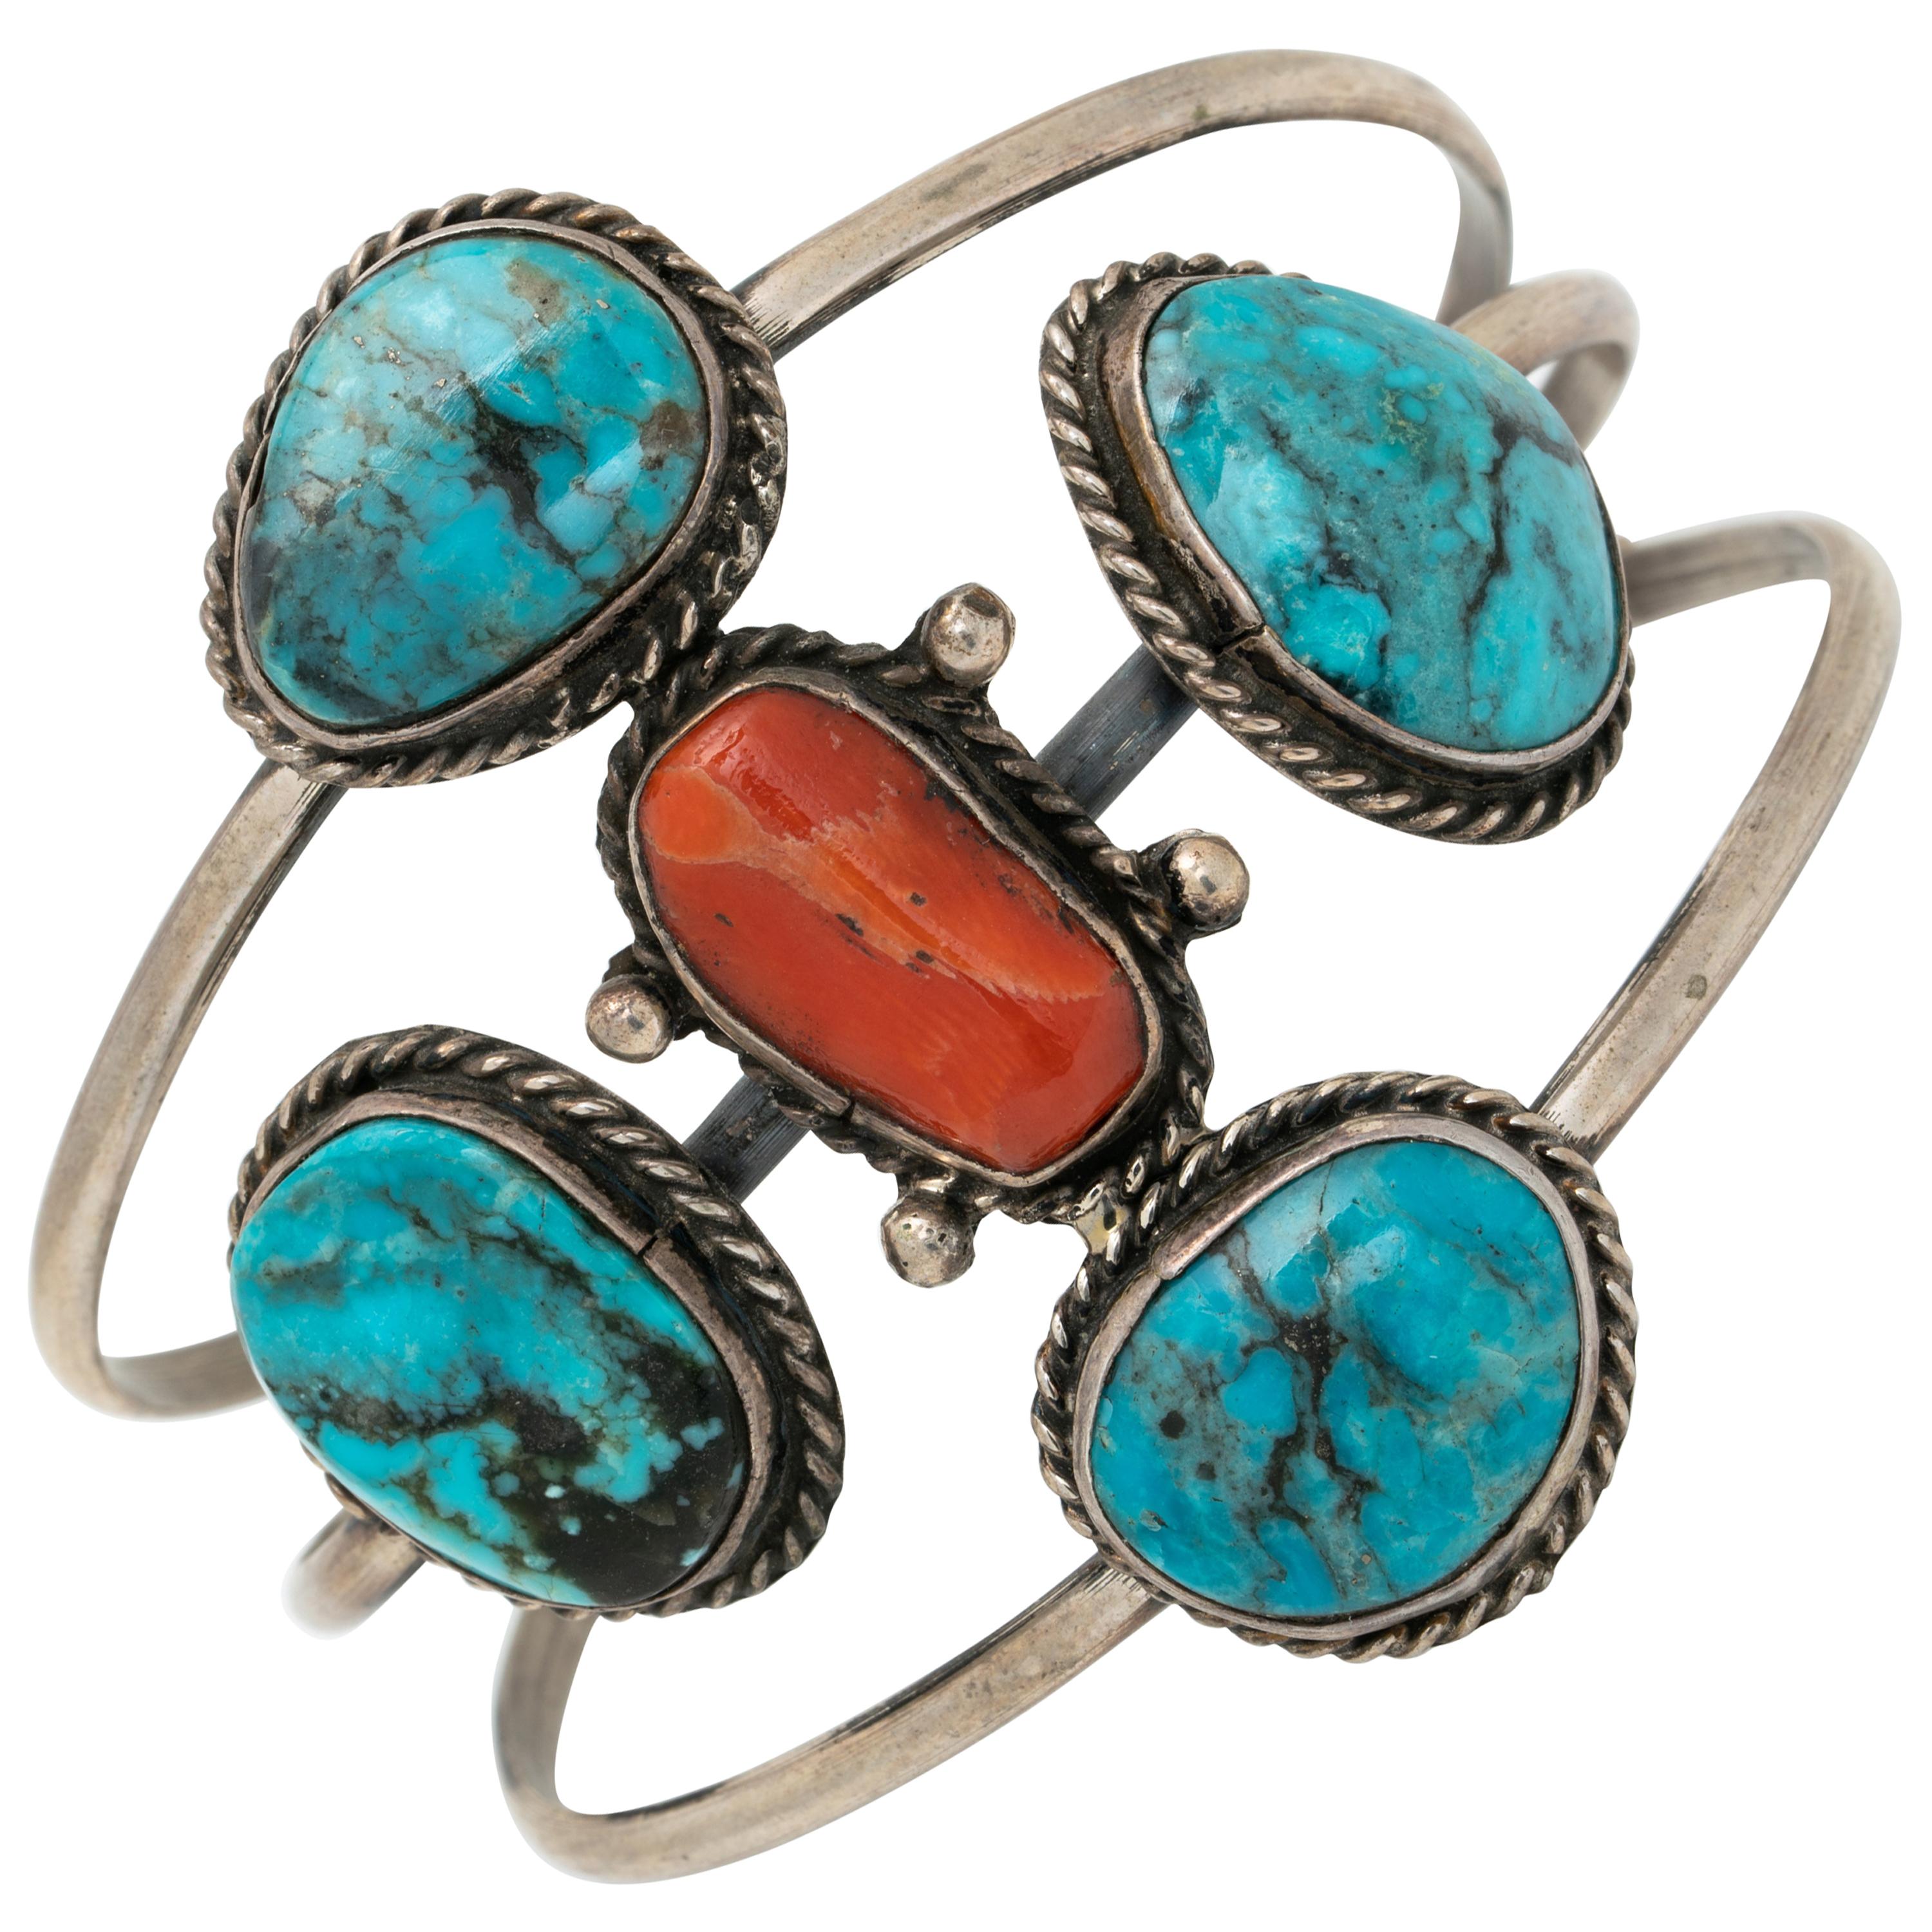 Vintage Native American Navajo Sterling Silver Turquoise and Coral Bracelet